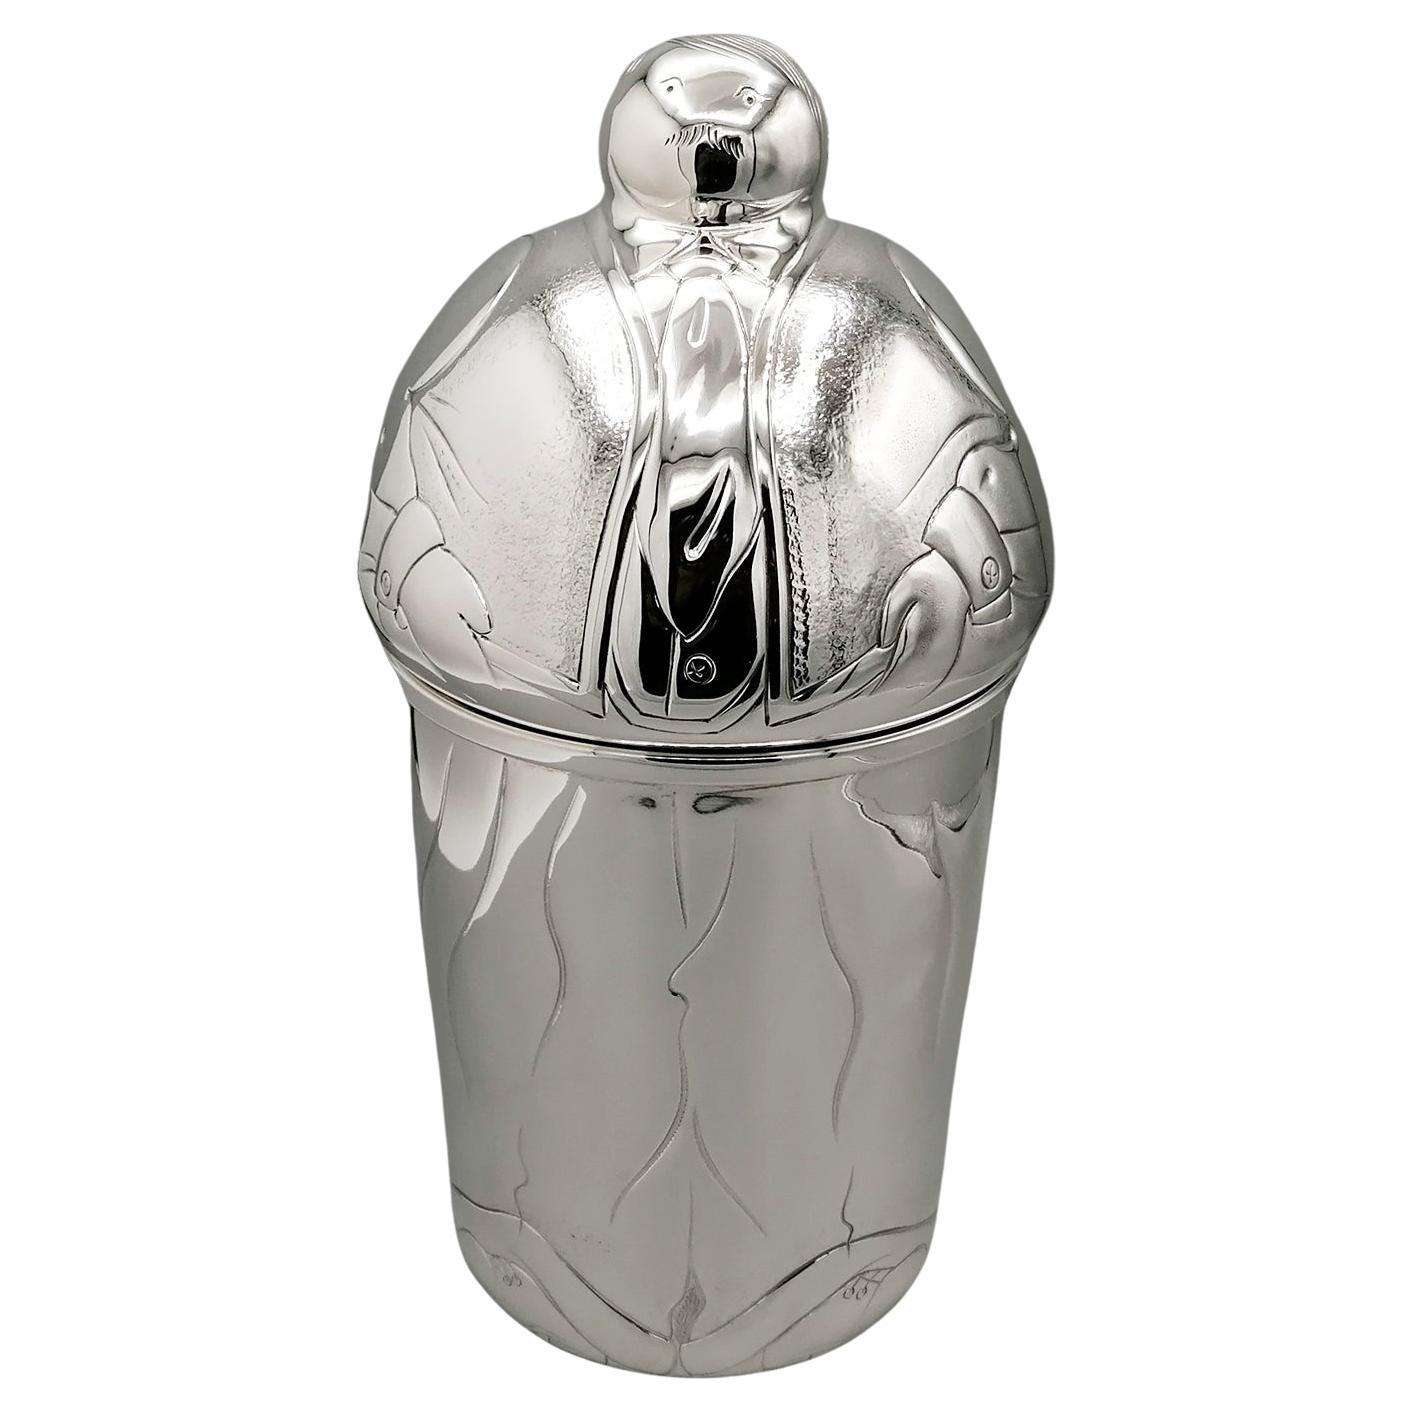 20° Siècle Italian Sterling Silver Decorative Glacette Wine cooler